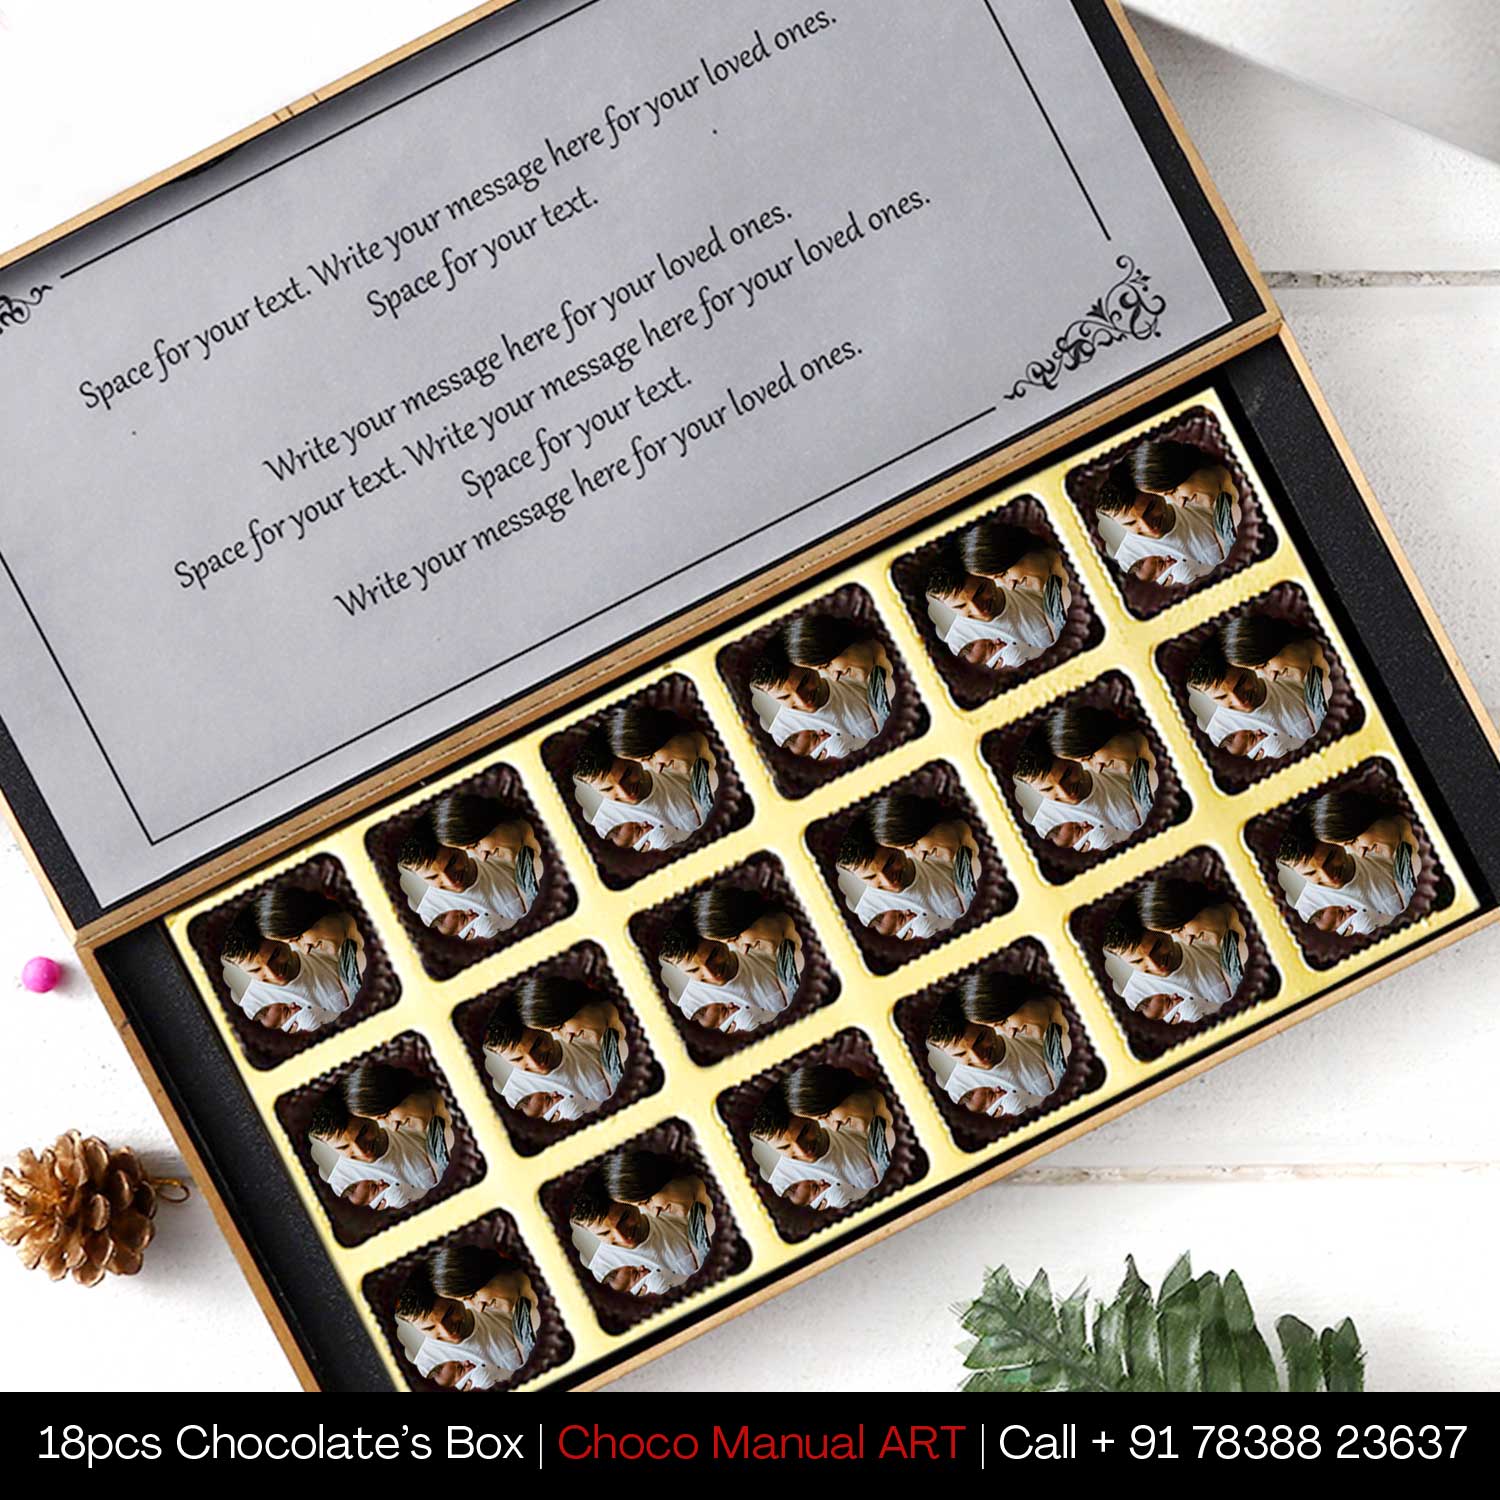  chocolate with photo printed on it personalized chocolates for birthday personalised chocolate personalised chocolates with names photo chocolate box photo on chocolate personalised chocolate box personalized chocolate gifts